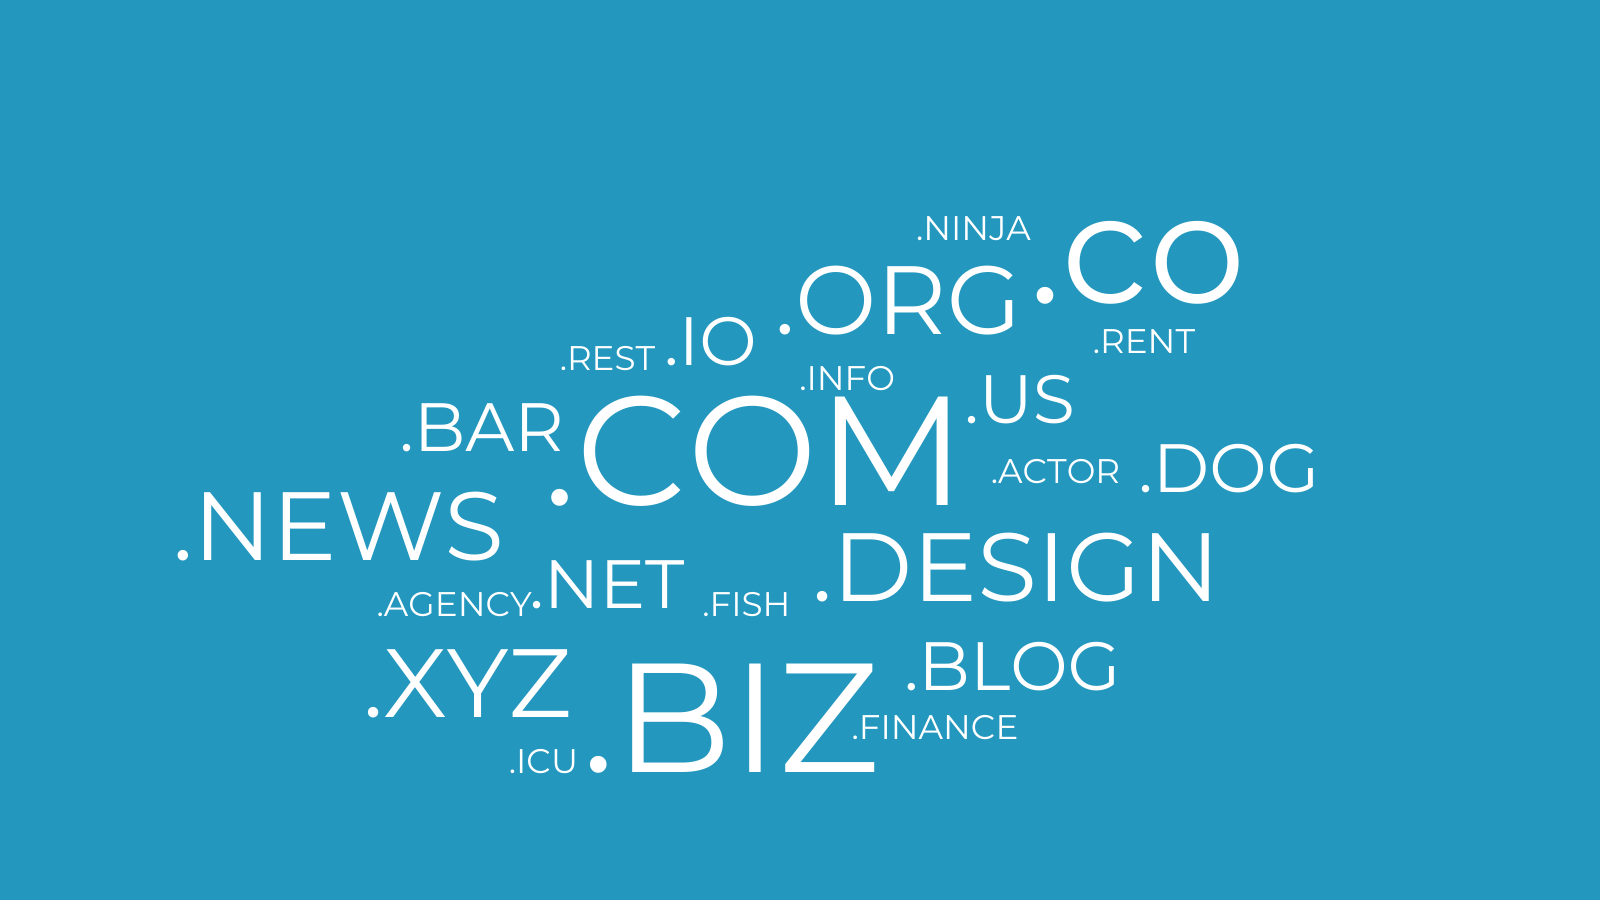 A word cloud of TLDs